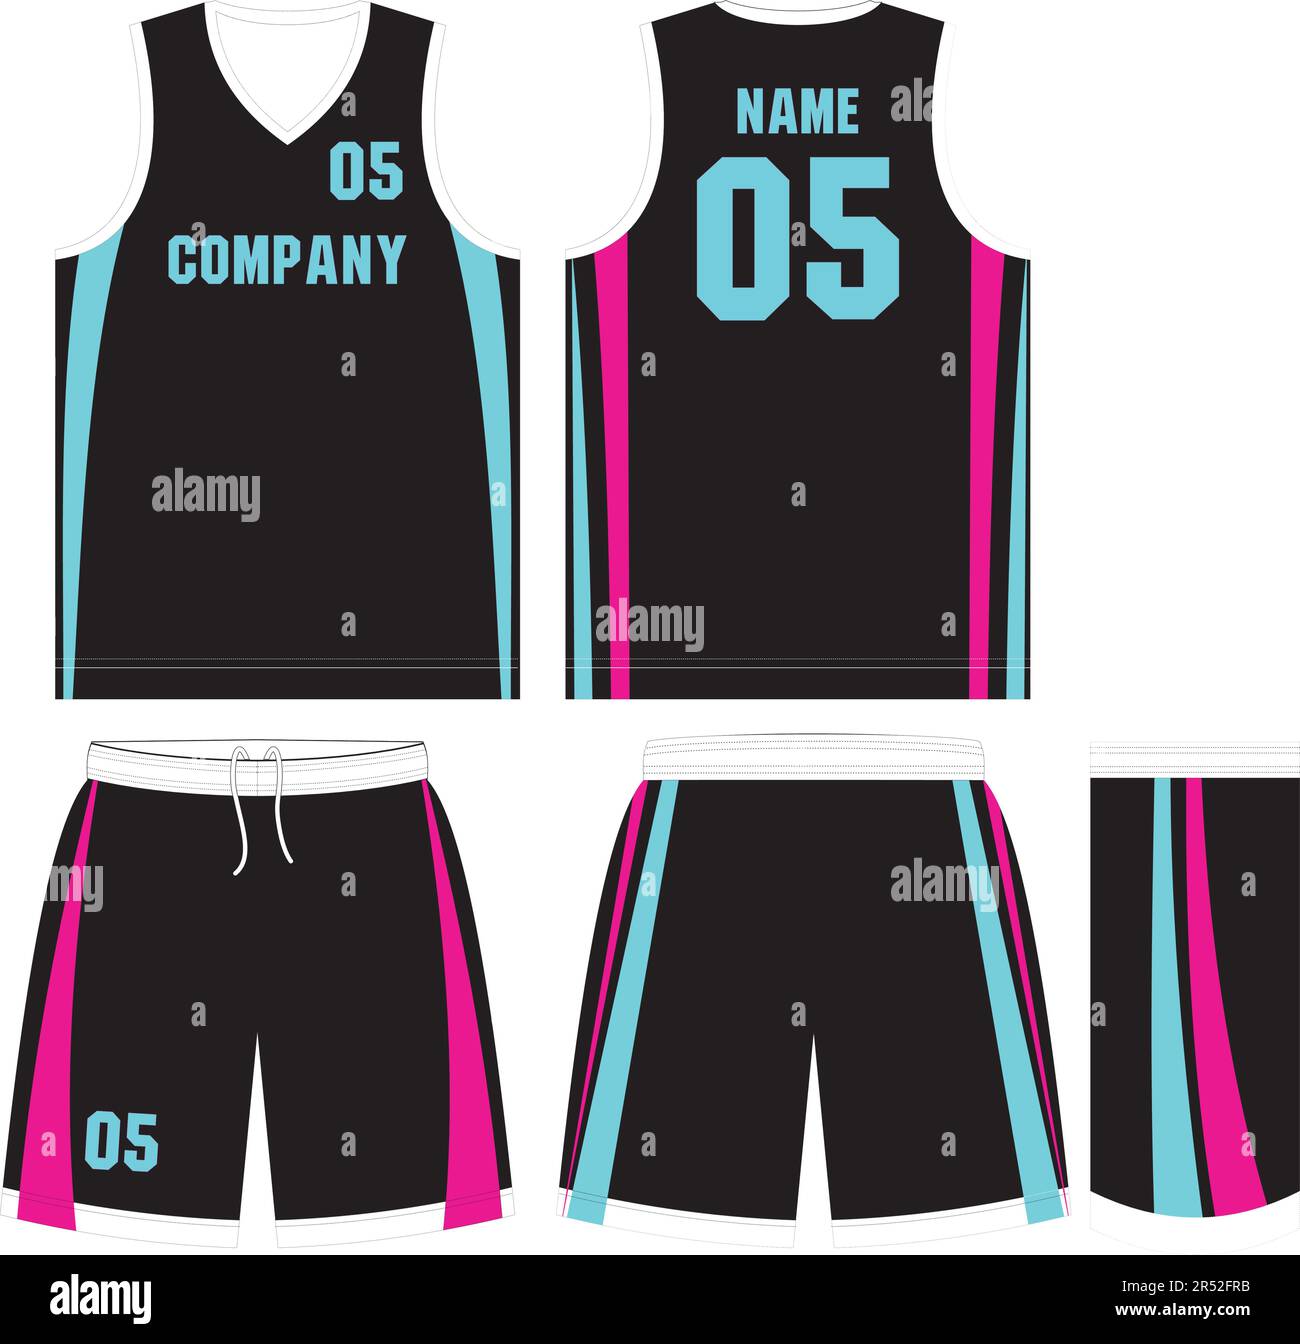 Basketball Uniform, Shorts, Template for Basketball Club. Front and ...